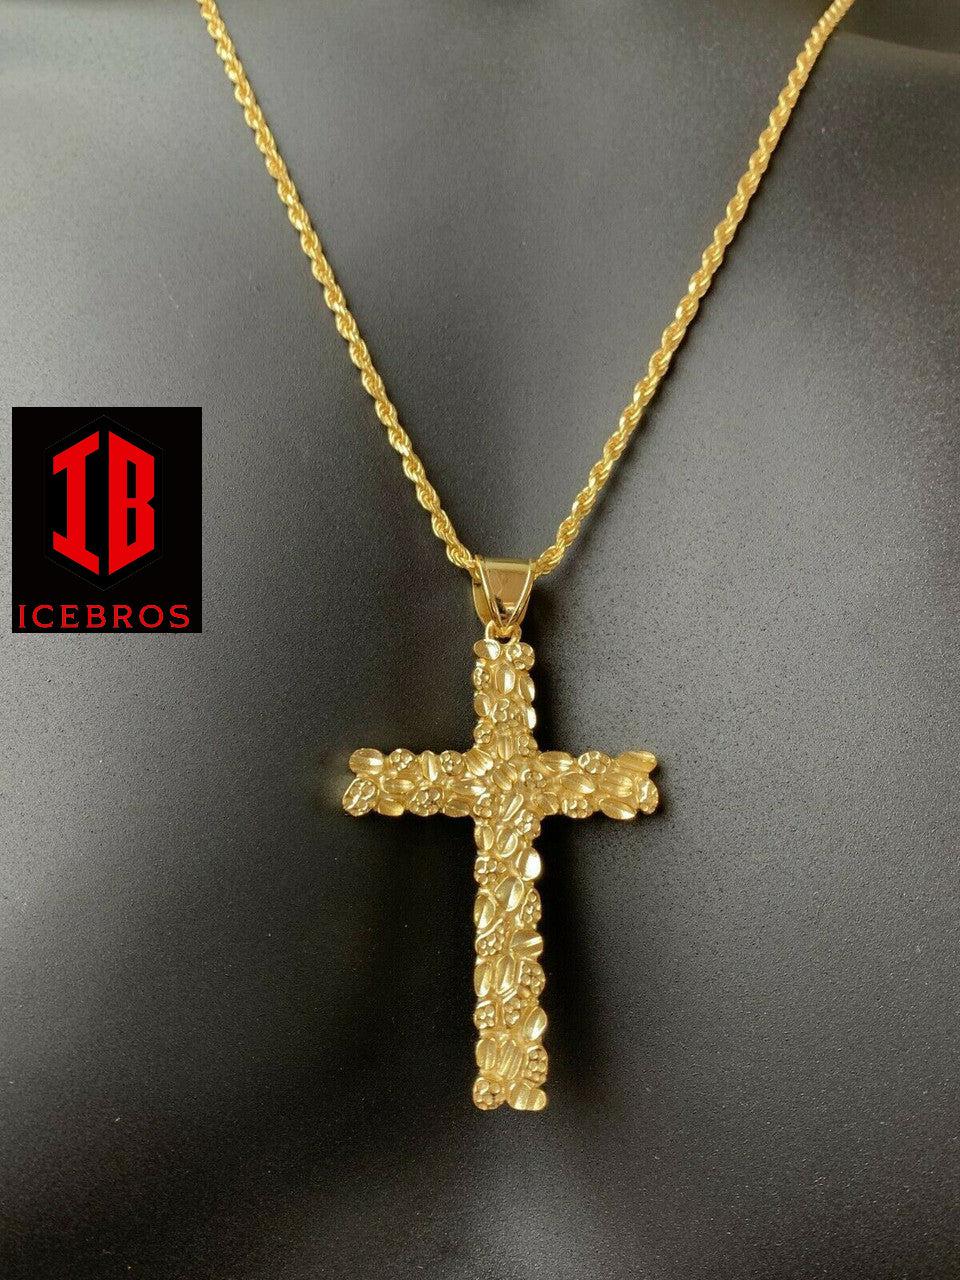 X-Large 2.25" Gold Nugget Cross 14k Gold Over Solid 925 Silver Necklace Chain